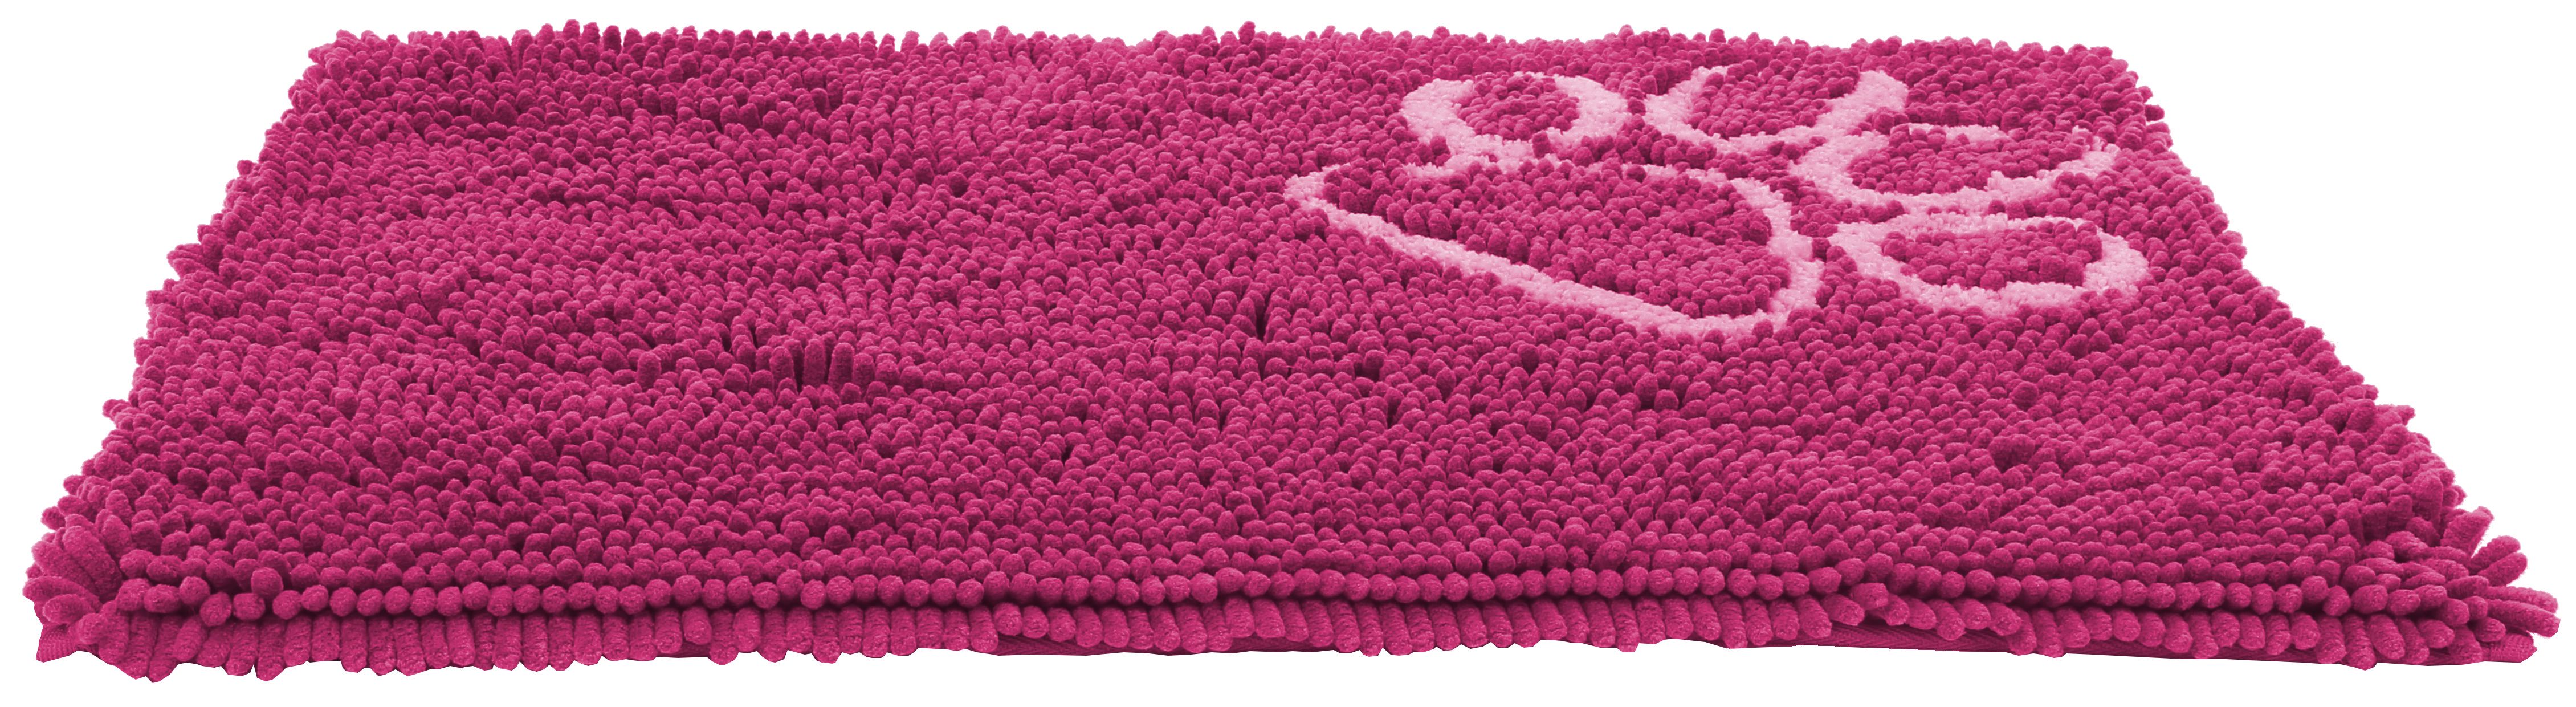 Pet Life ® 'Fuzzy' Quick-Drying Anti-Skid and Machine Washable Dog Mat Pink 